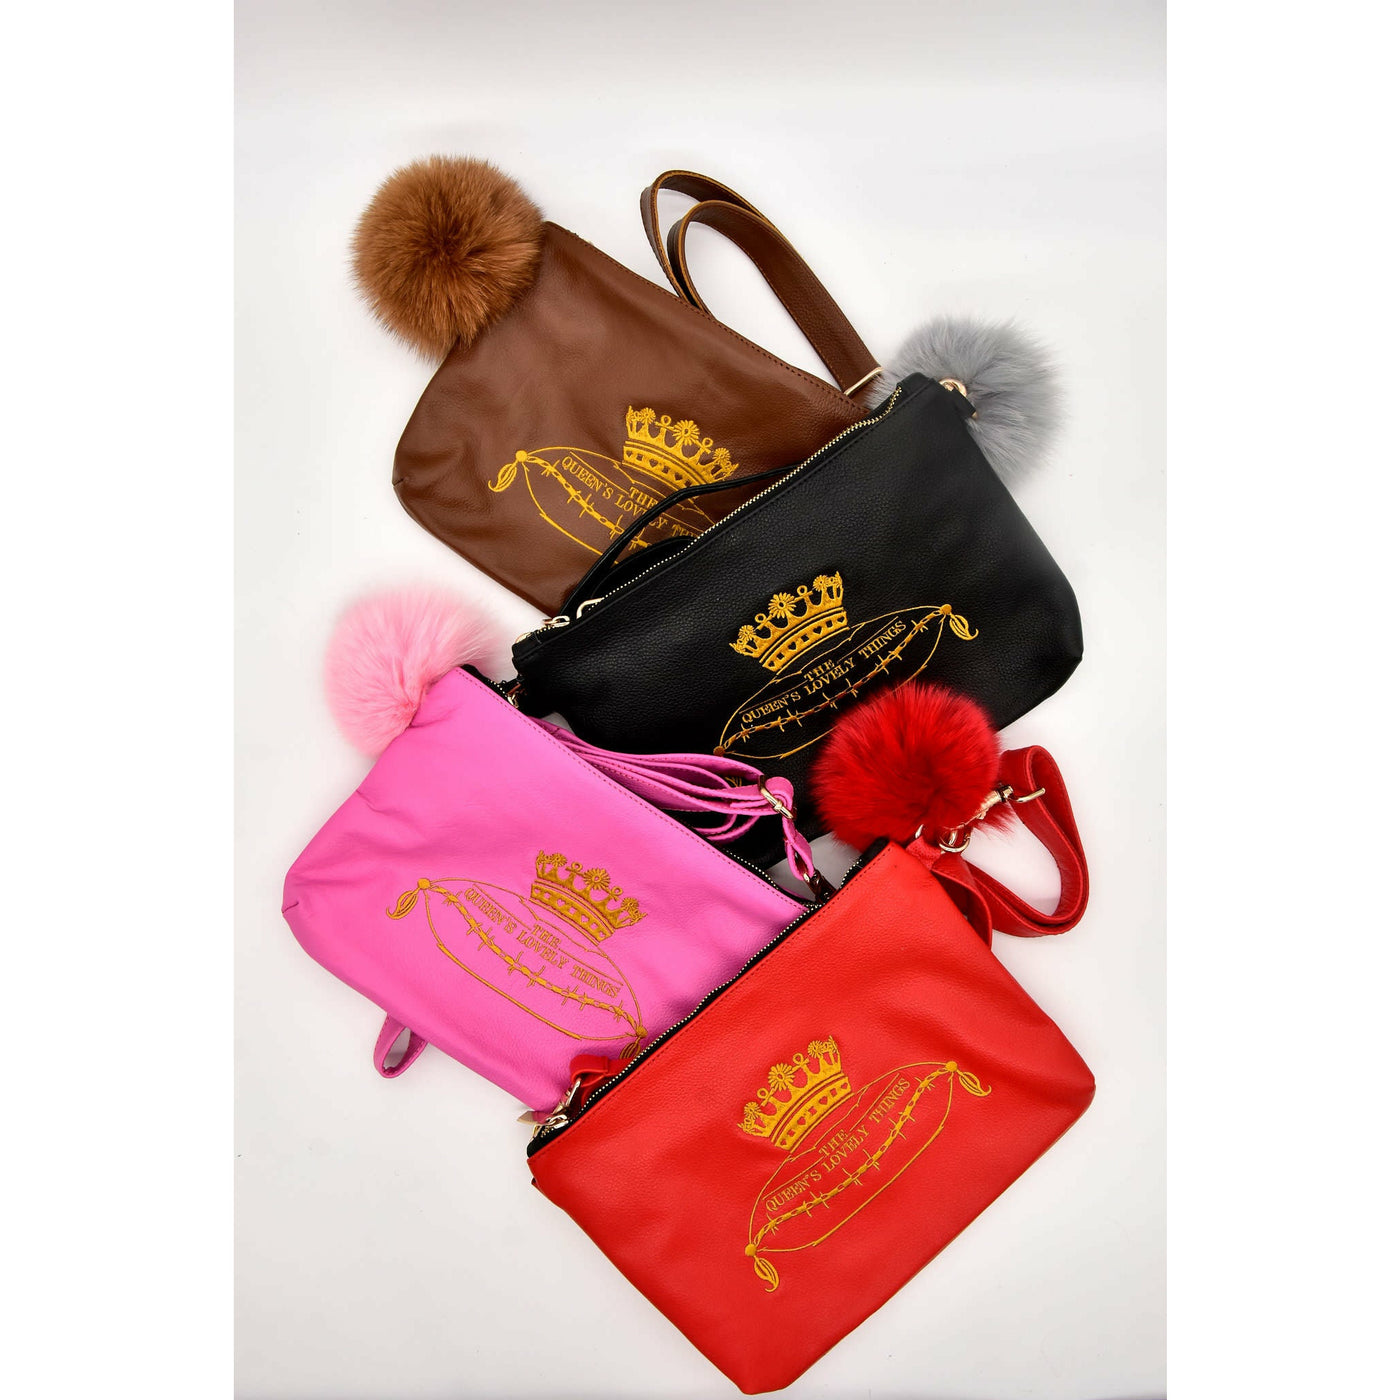 Queen’s Lovely Things Limited Edition Crossbody Wristlet Bag